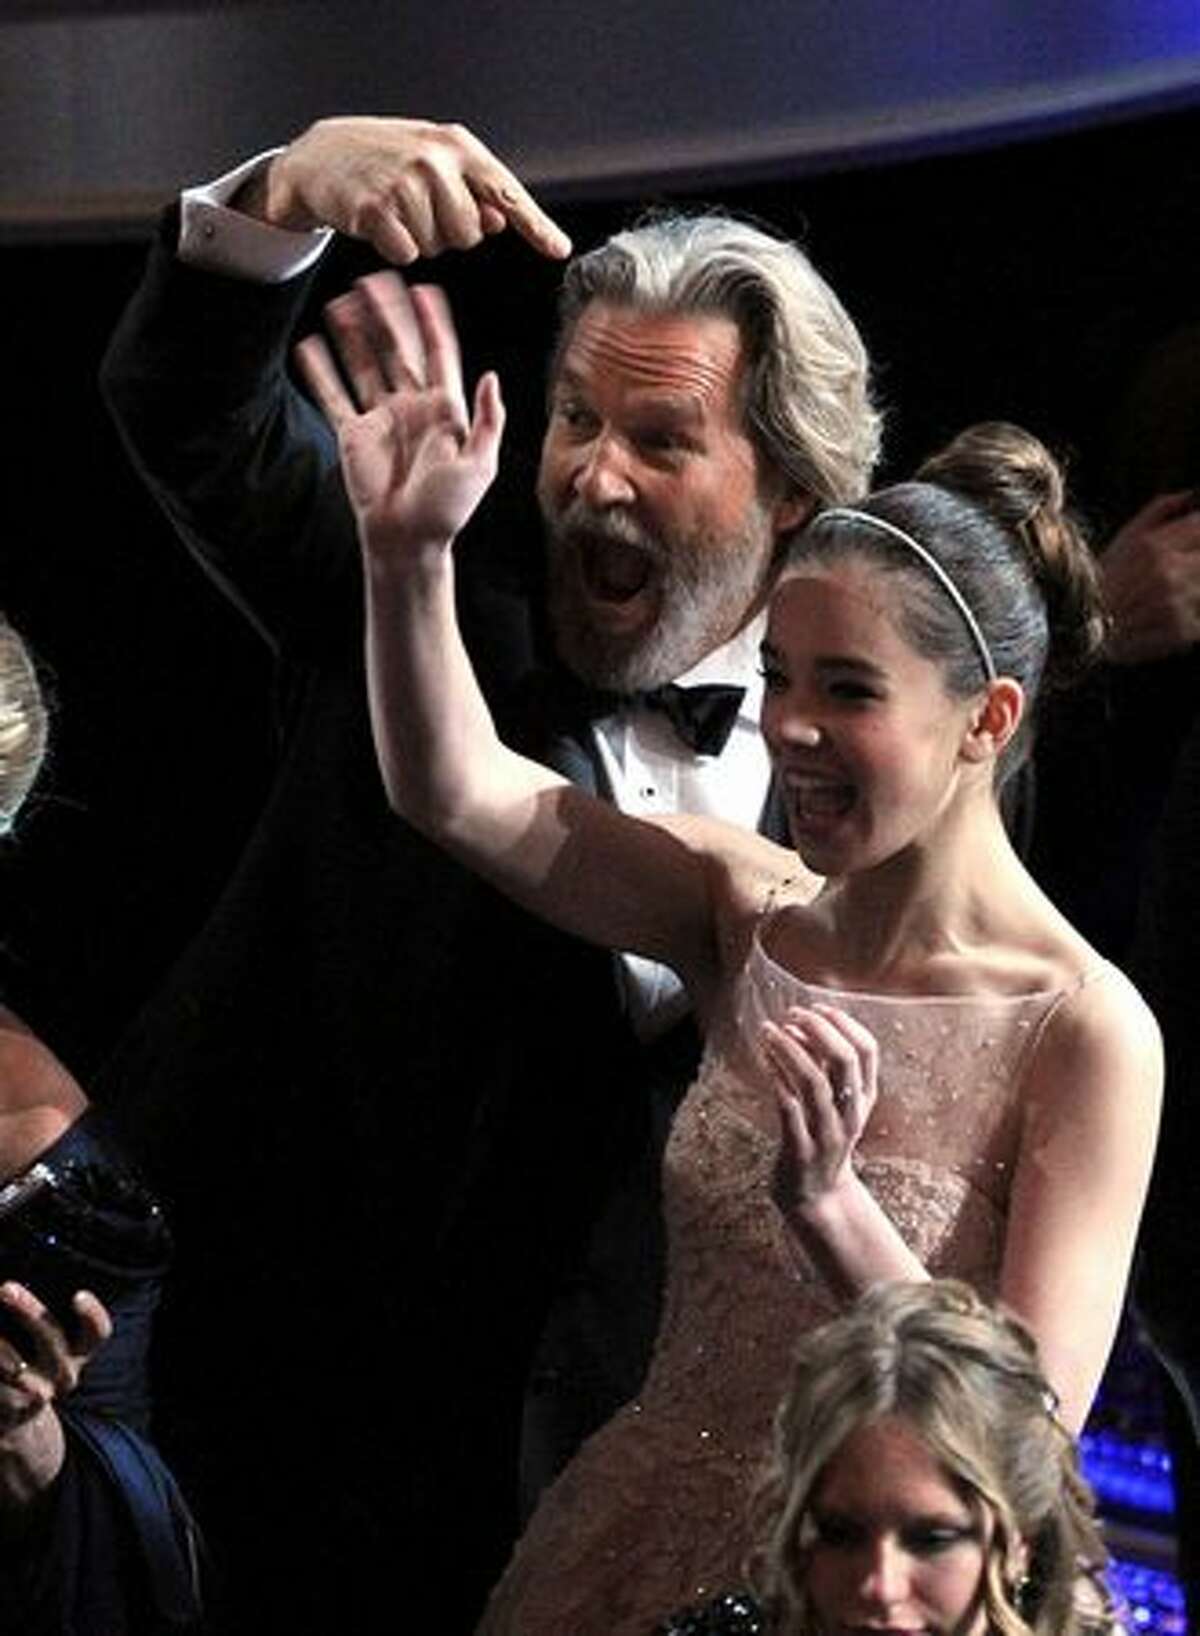 Actor Jeff Bridges and actress Hailee Steinfeld smile in the audience before the 83rd Annual Academy Awards held at the Kodak Theatre in Hollywood, California.